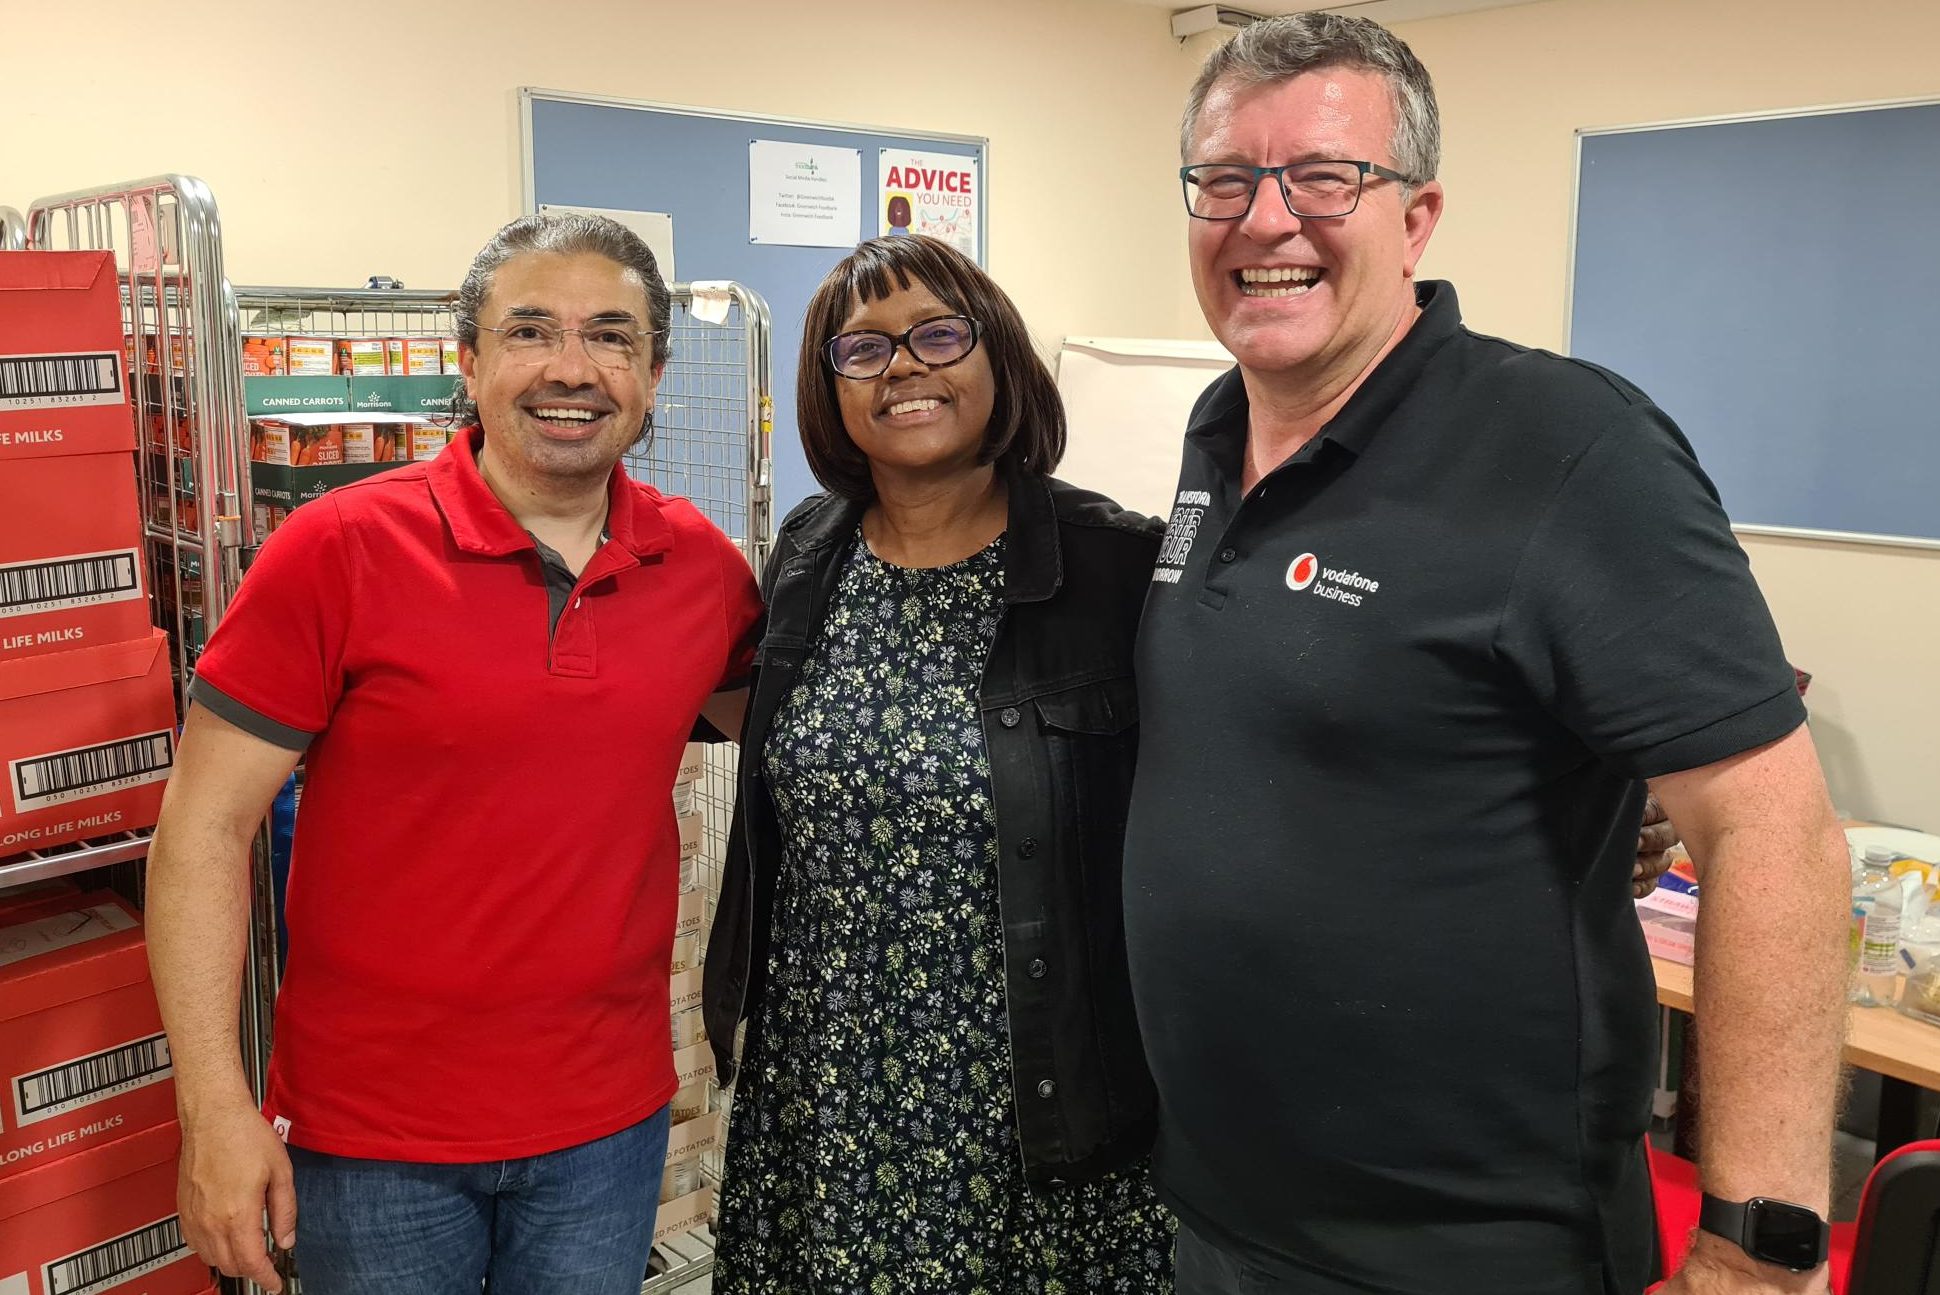 (From left to right) Ahmed Essam, Vodafone's UK CEO; Kathy Byfield, Greenwich Foodbank Operations Manager; Nick Gliddon, Vodafone's UK Business Director